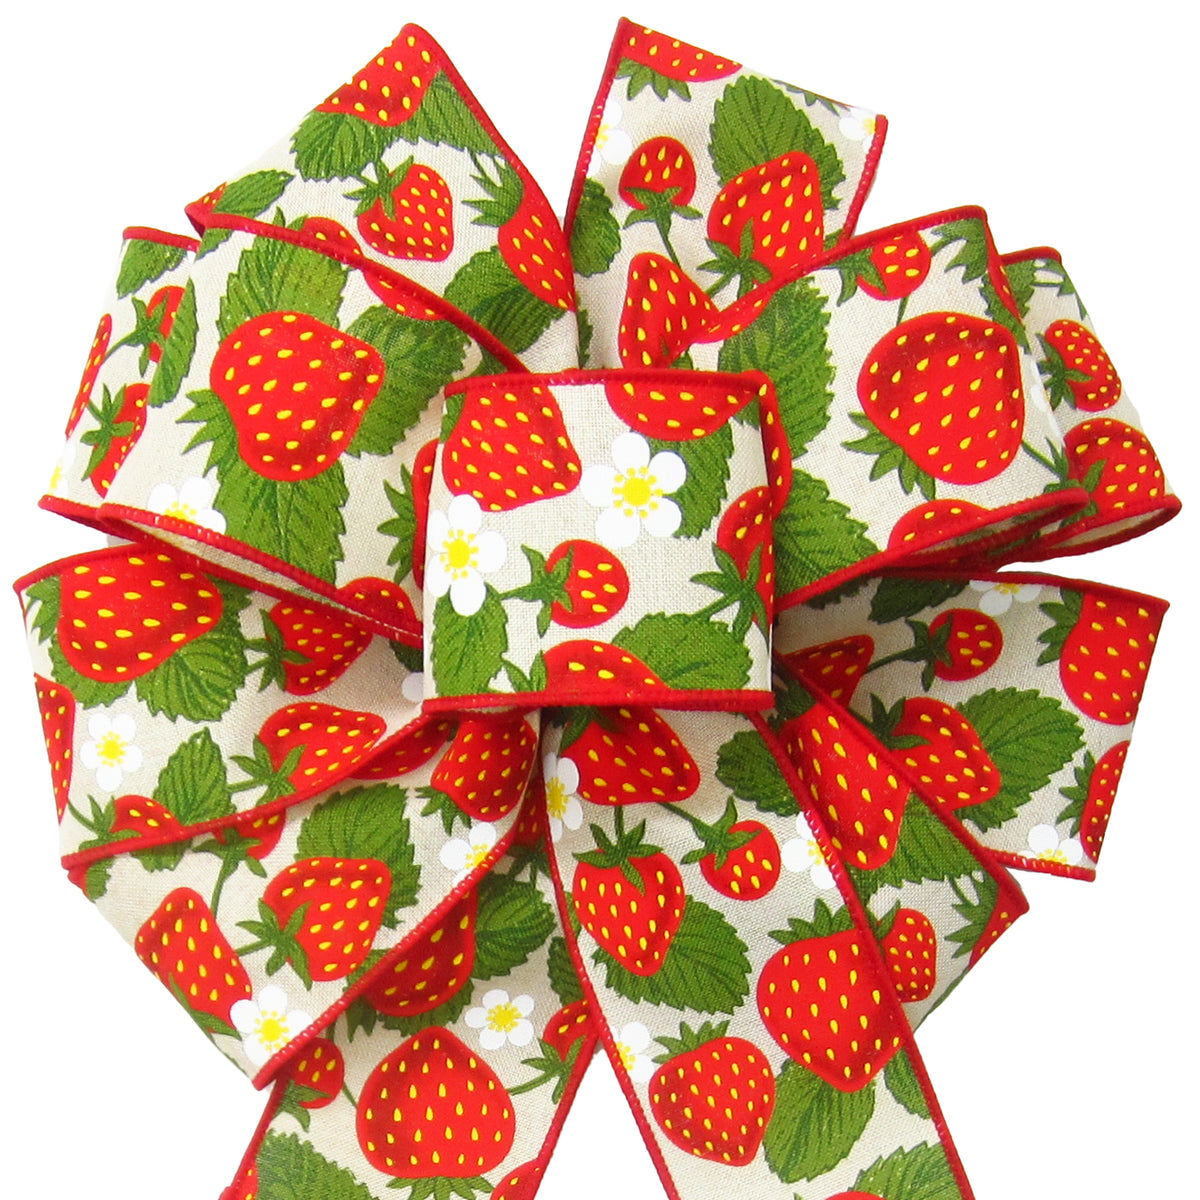 Strawberry Fruit Bows - Wired Field of Strawberries Fruit Bows 8 Inch